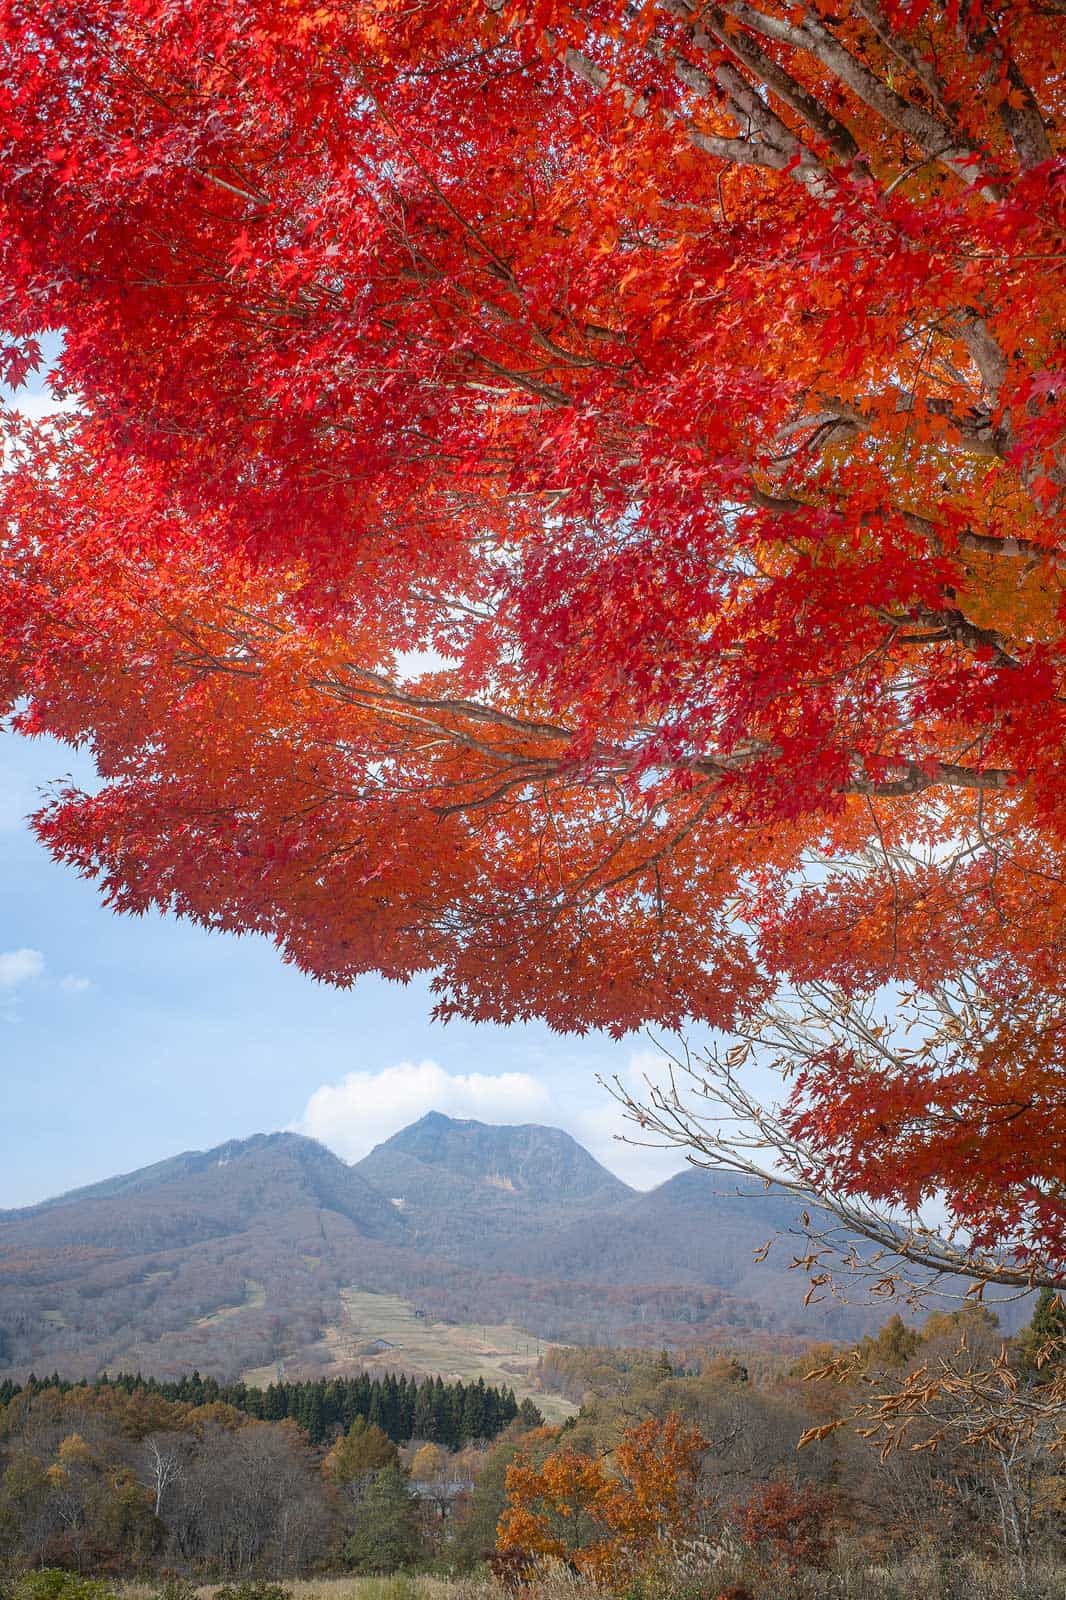 A bright red Japanese maple tree in autumn with Mt Myoko in the background.